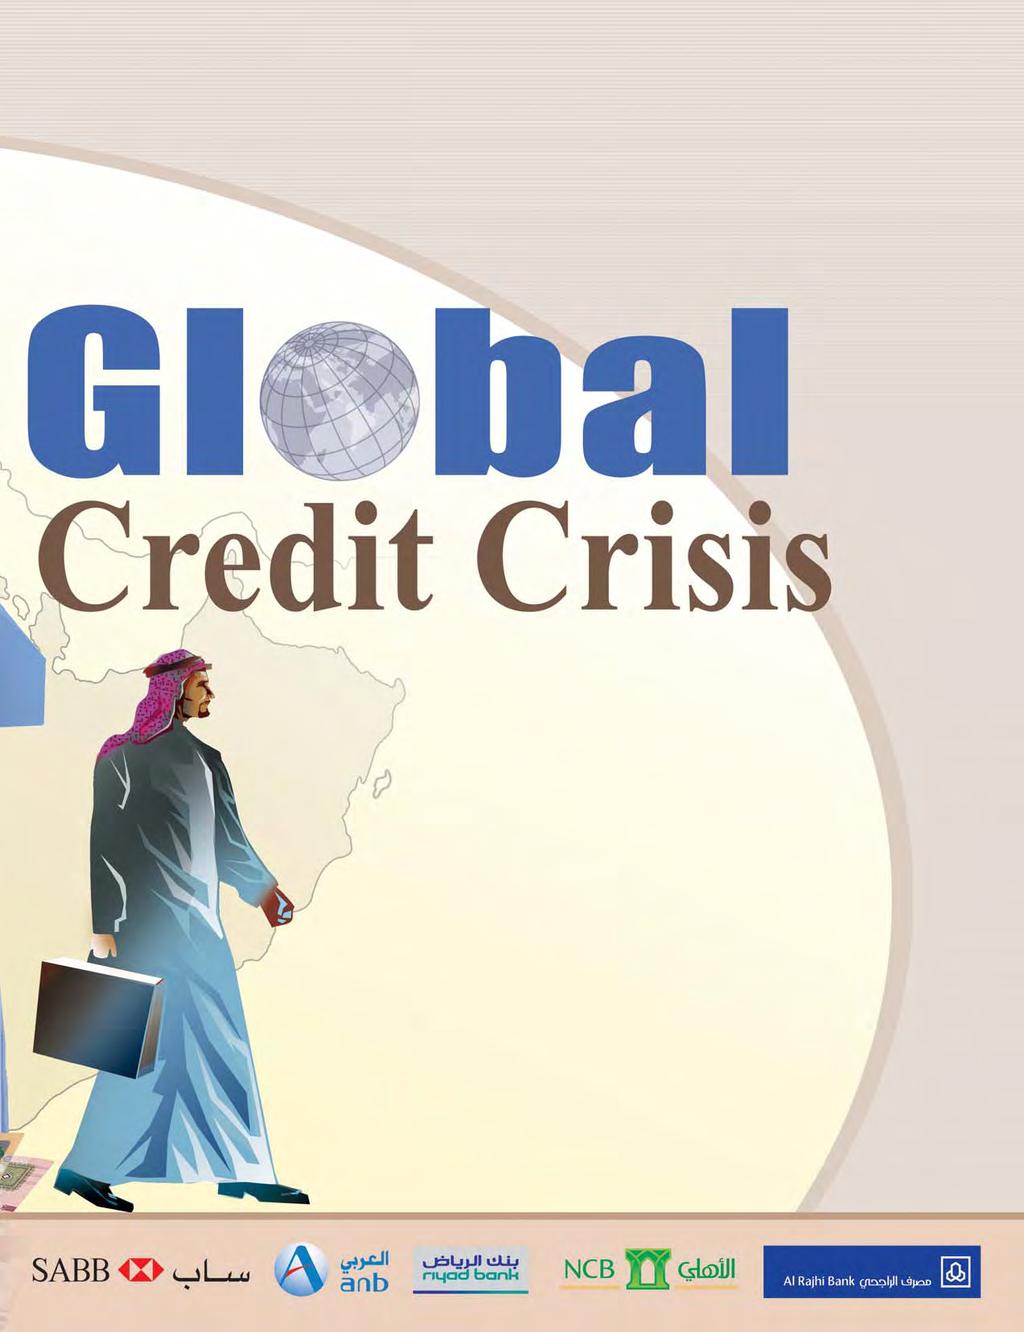 By Irfan Iqbal Khan The ongoing credit crisis has prompted ratings agencies to forecast bleak future for Gulf Arab banks but experts believe the outlook will remain stable.